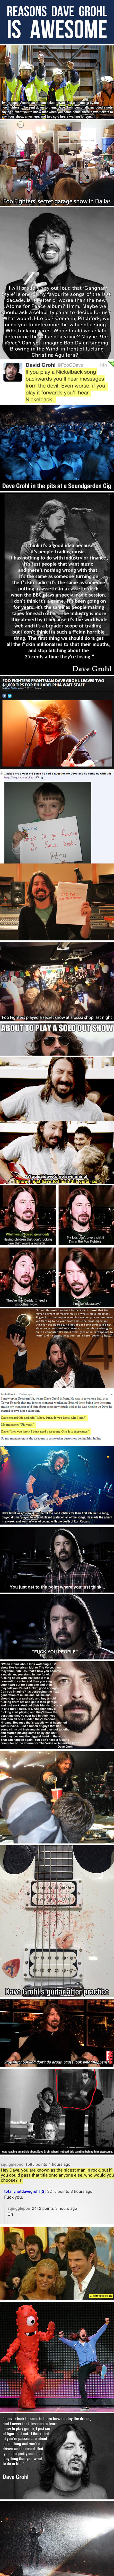 Dave Grohl Is A Good Guy